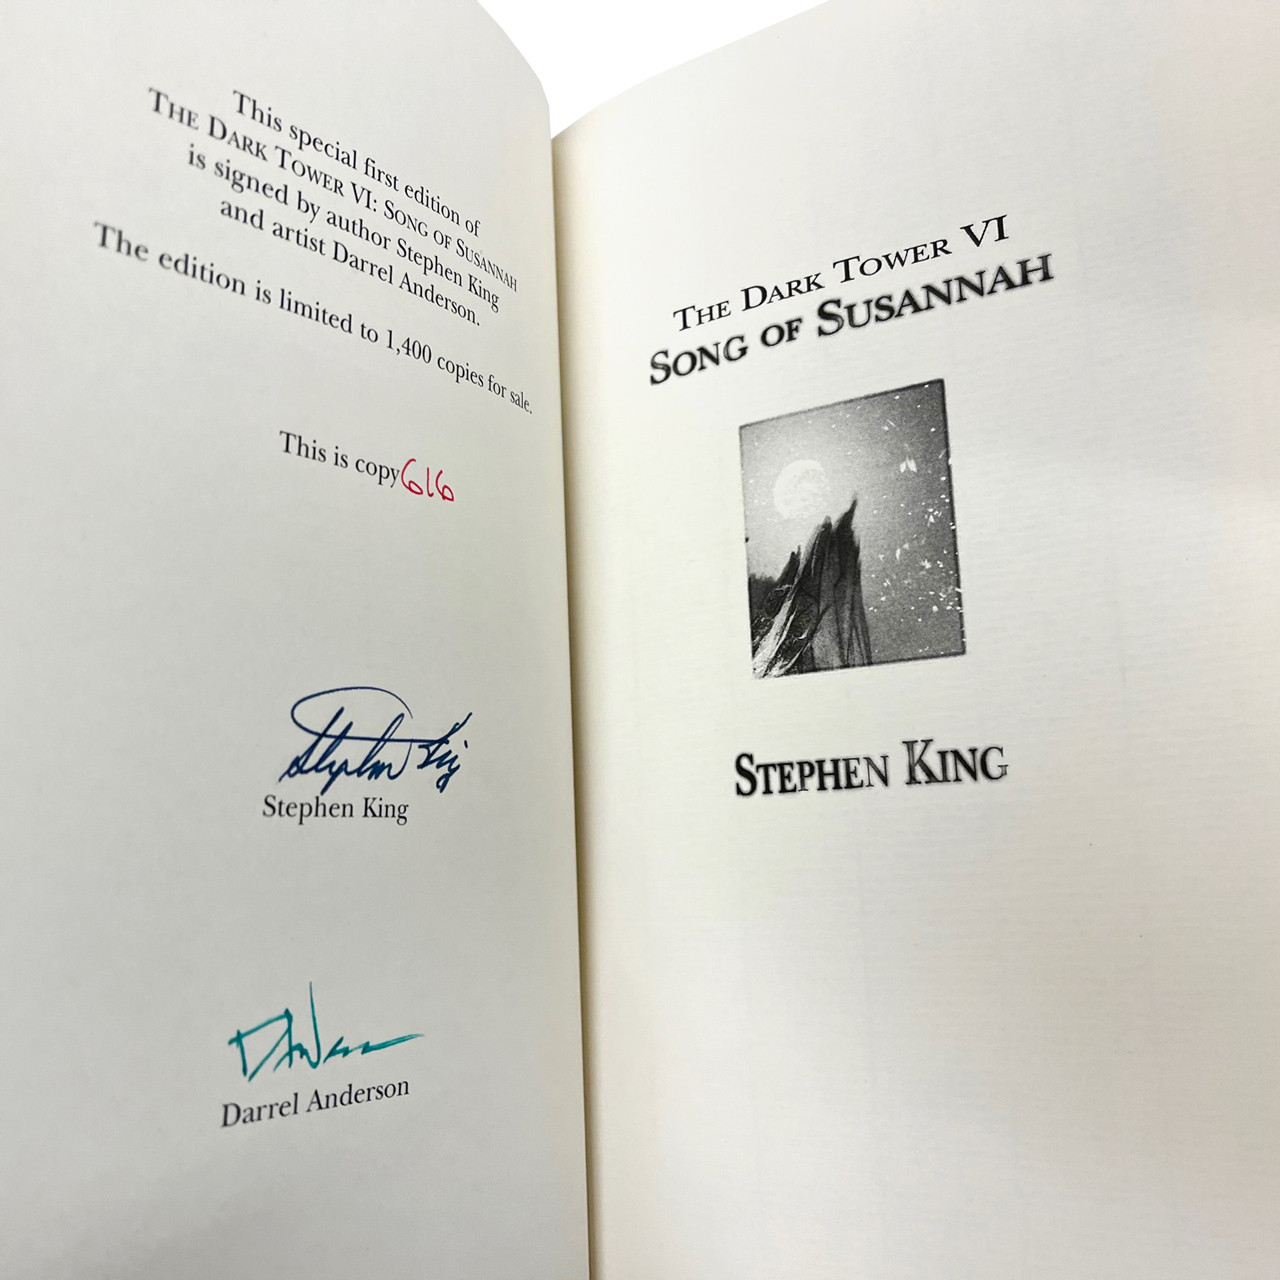 Stephen King "The Dark Tower" Signed Limited Edition, Complete Partial Matching Numbers 12-Volume Set, Signed Lettered Edition w/Purchasing Rights